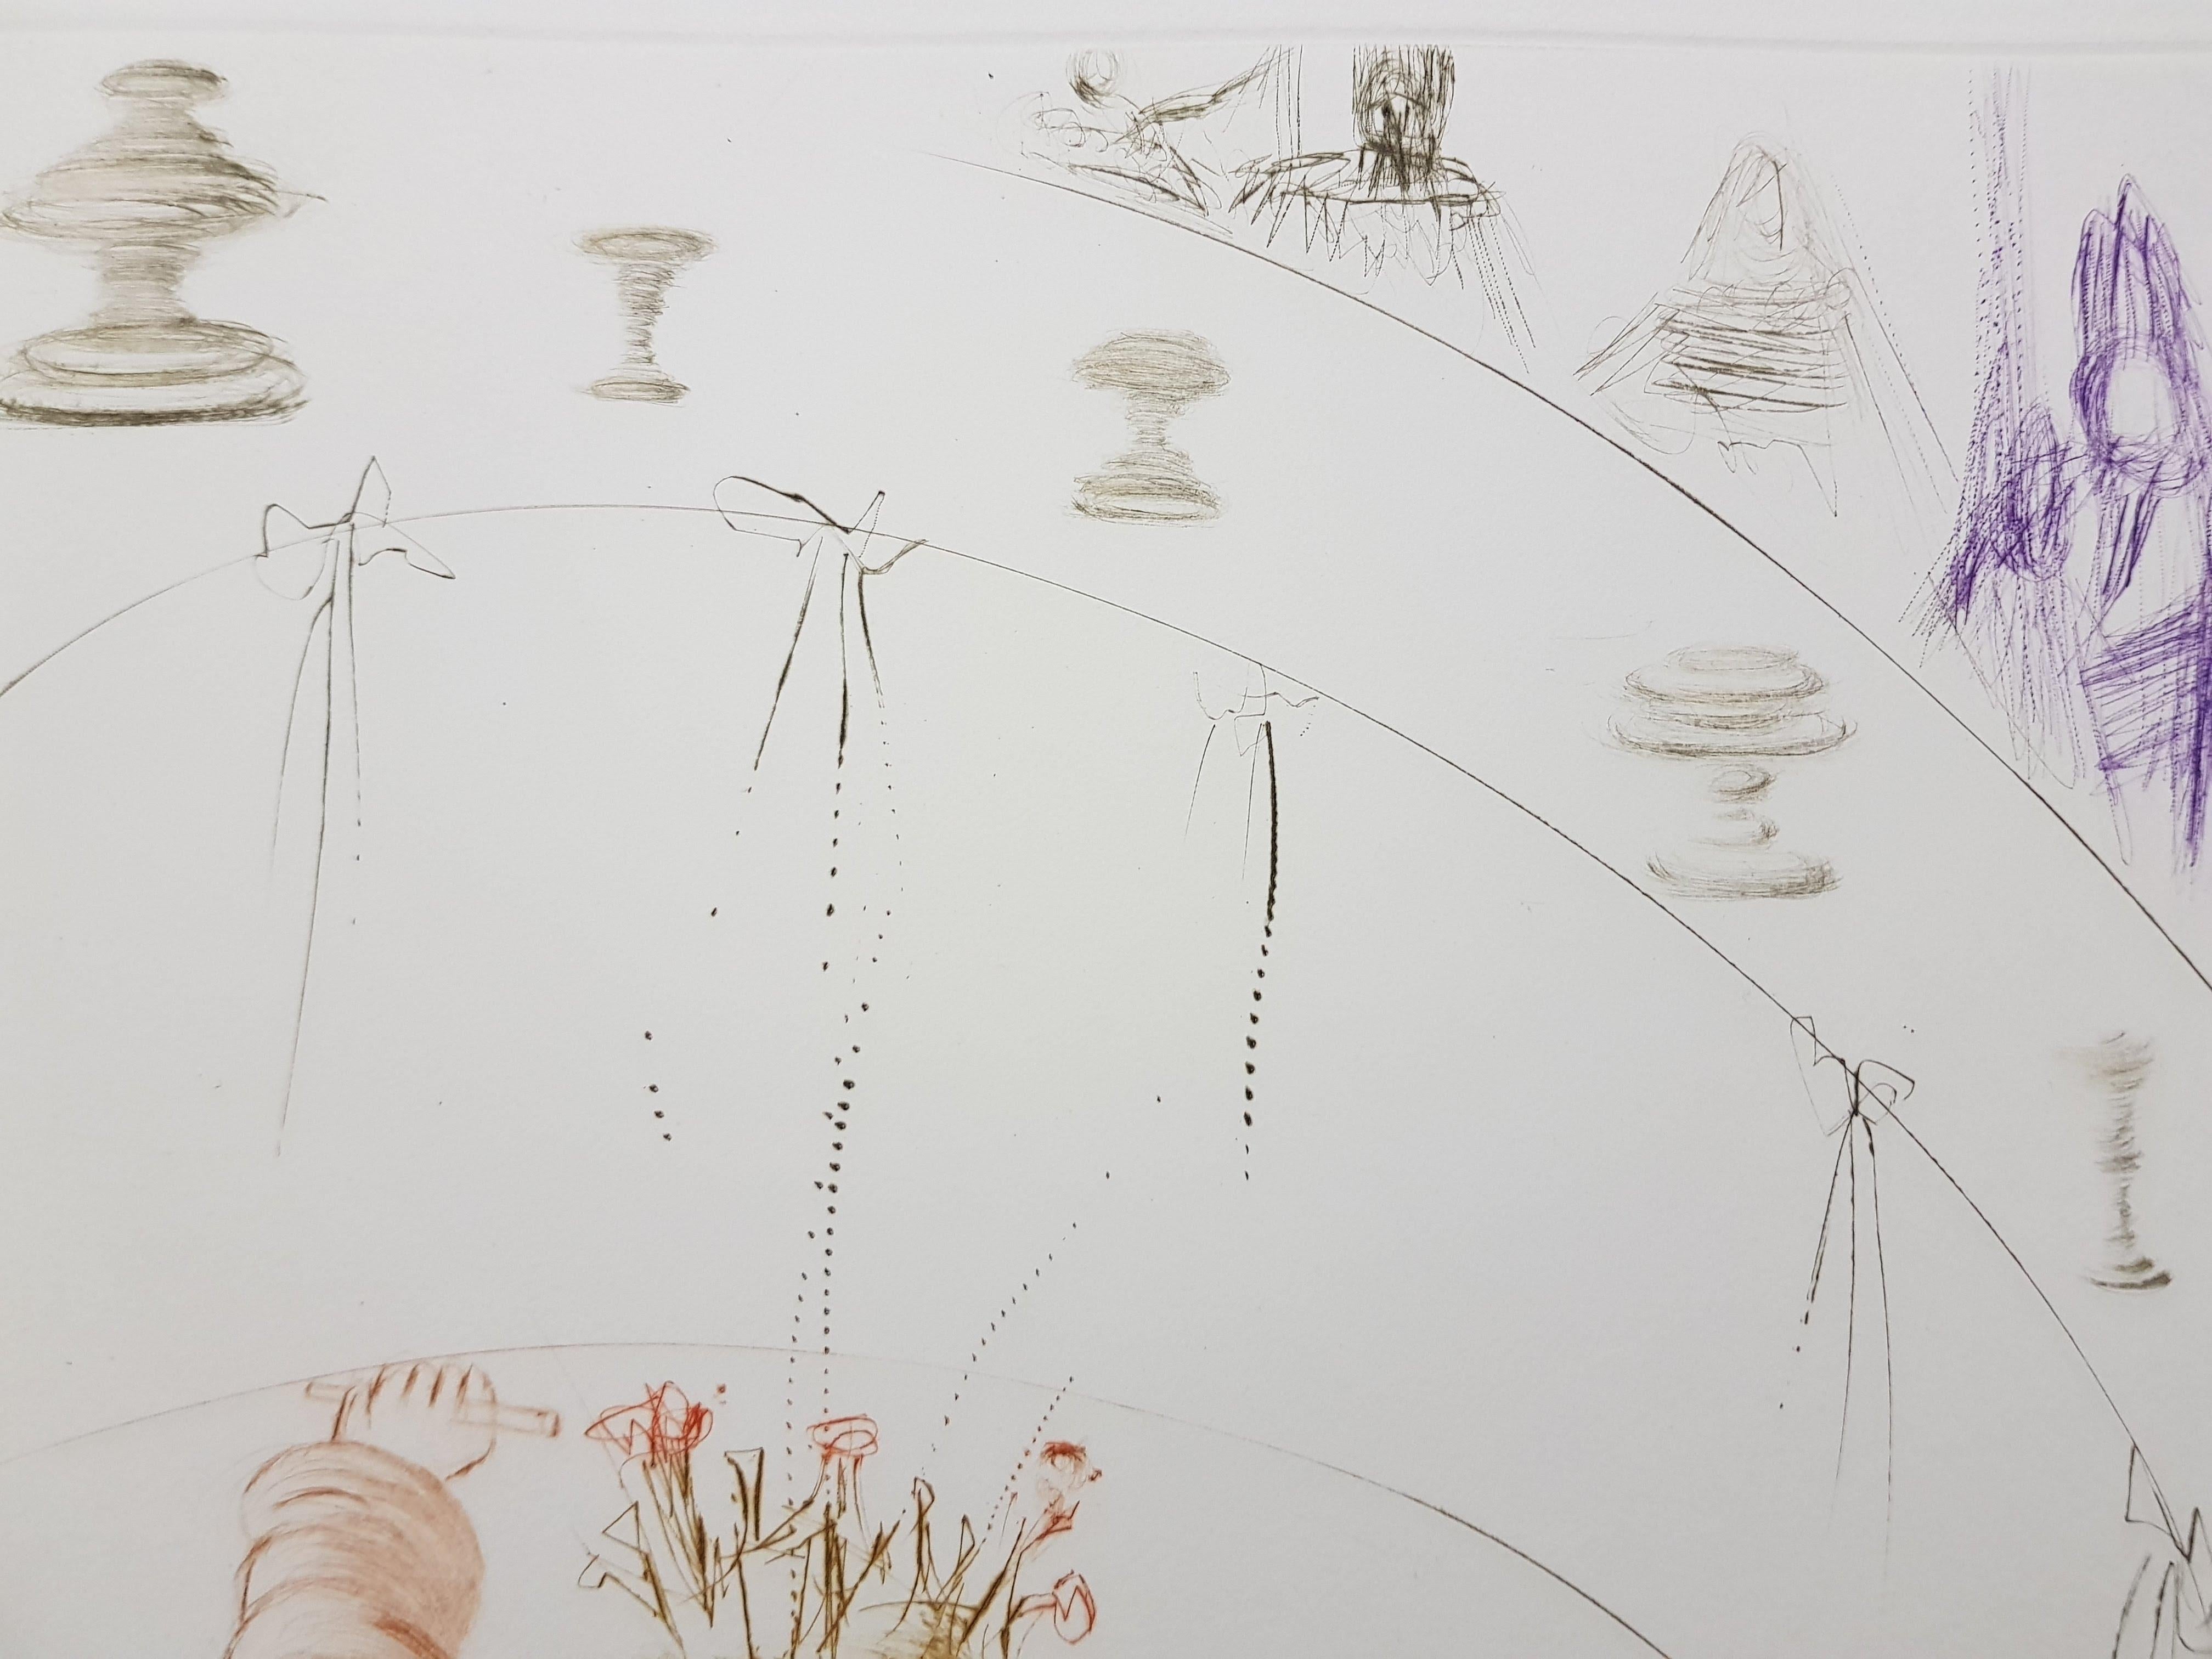 Salvador Dali - The Knights of King Arthur - Original Etching
Dimensions: 45 x 33 cm
Edition: 125
1970
Signed in pencil.
On Arches Vellum
References : Field 70-10 (p. 60-61)